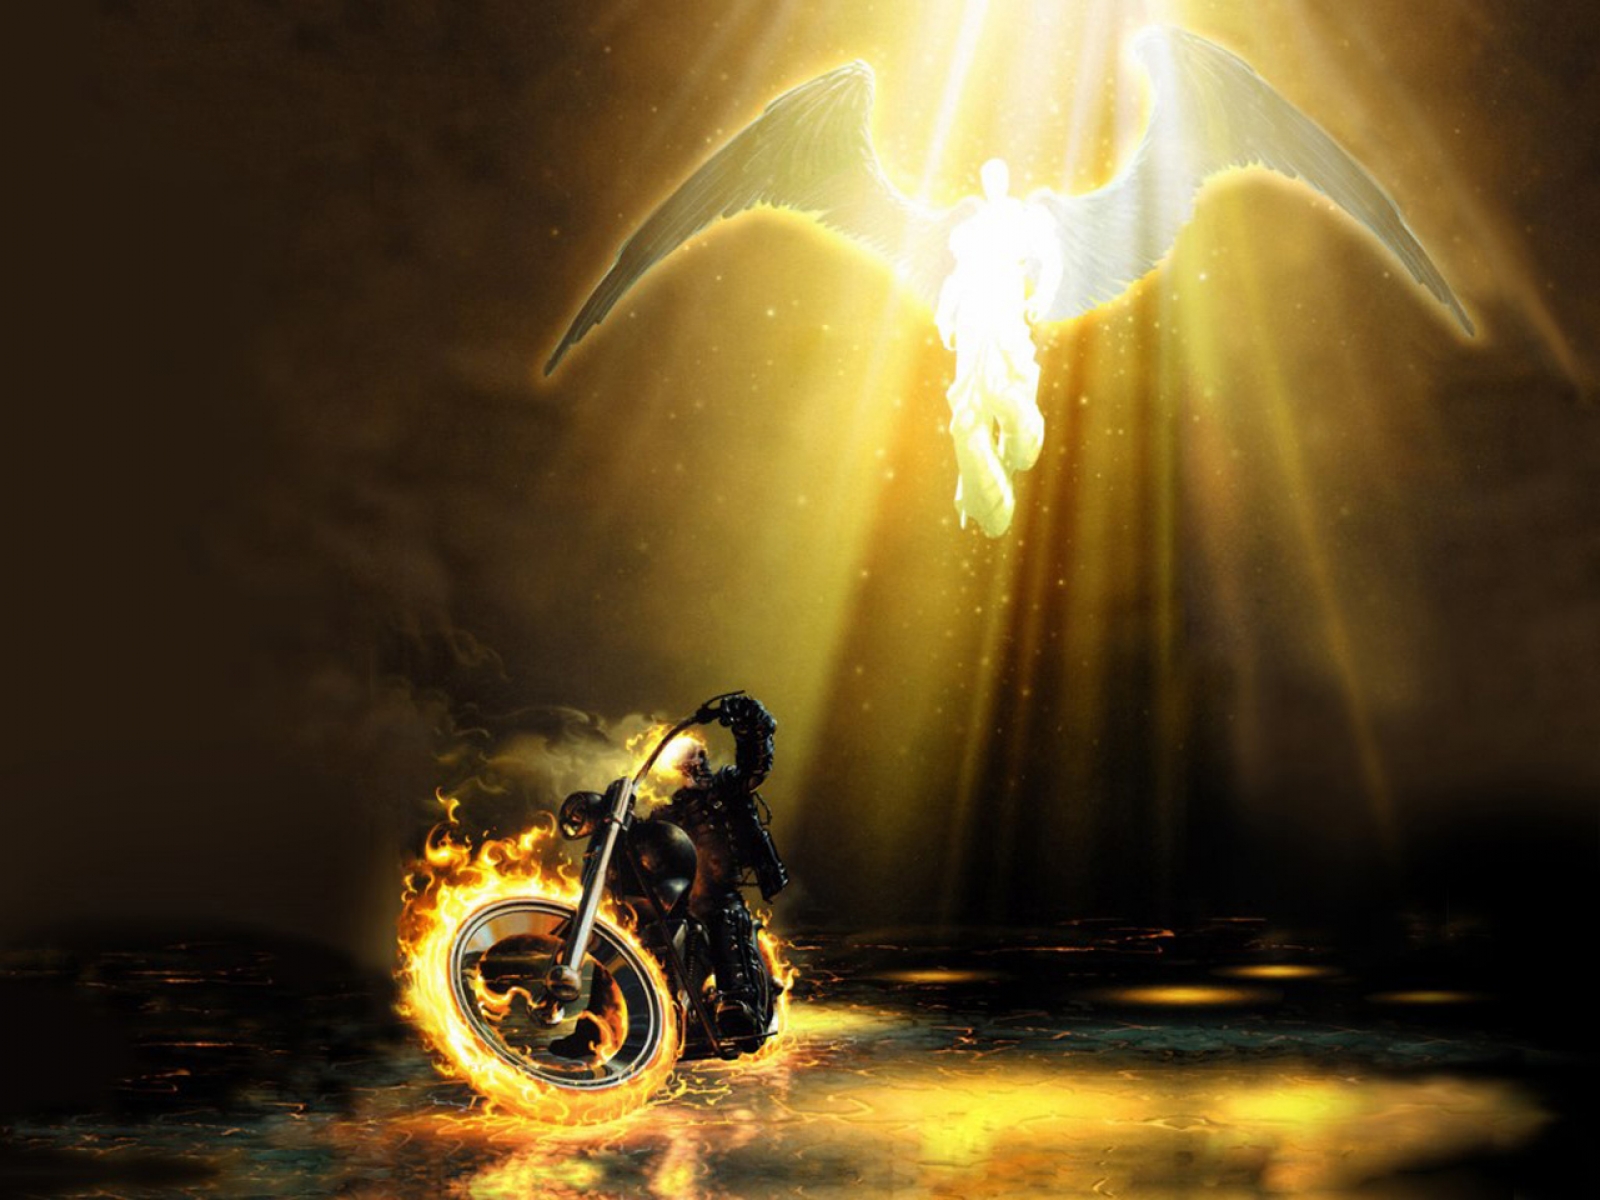 Ghost Rider & Angel in an intense battle, creating a fiery spectacle.